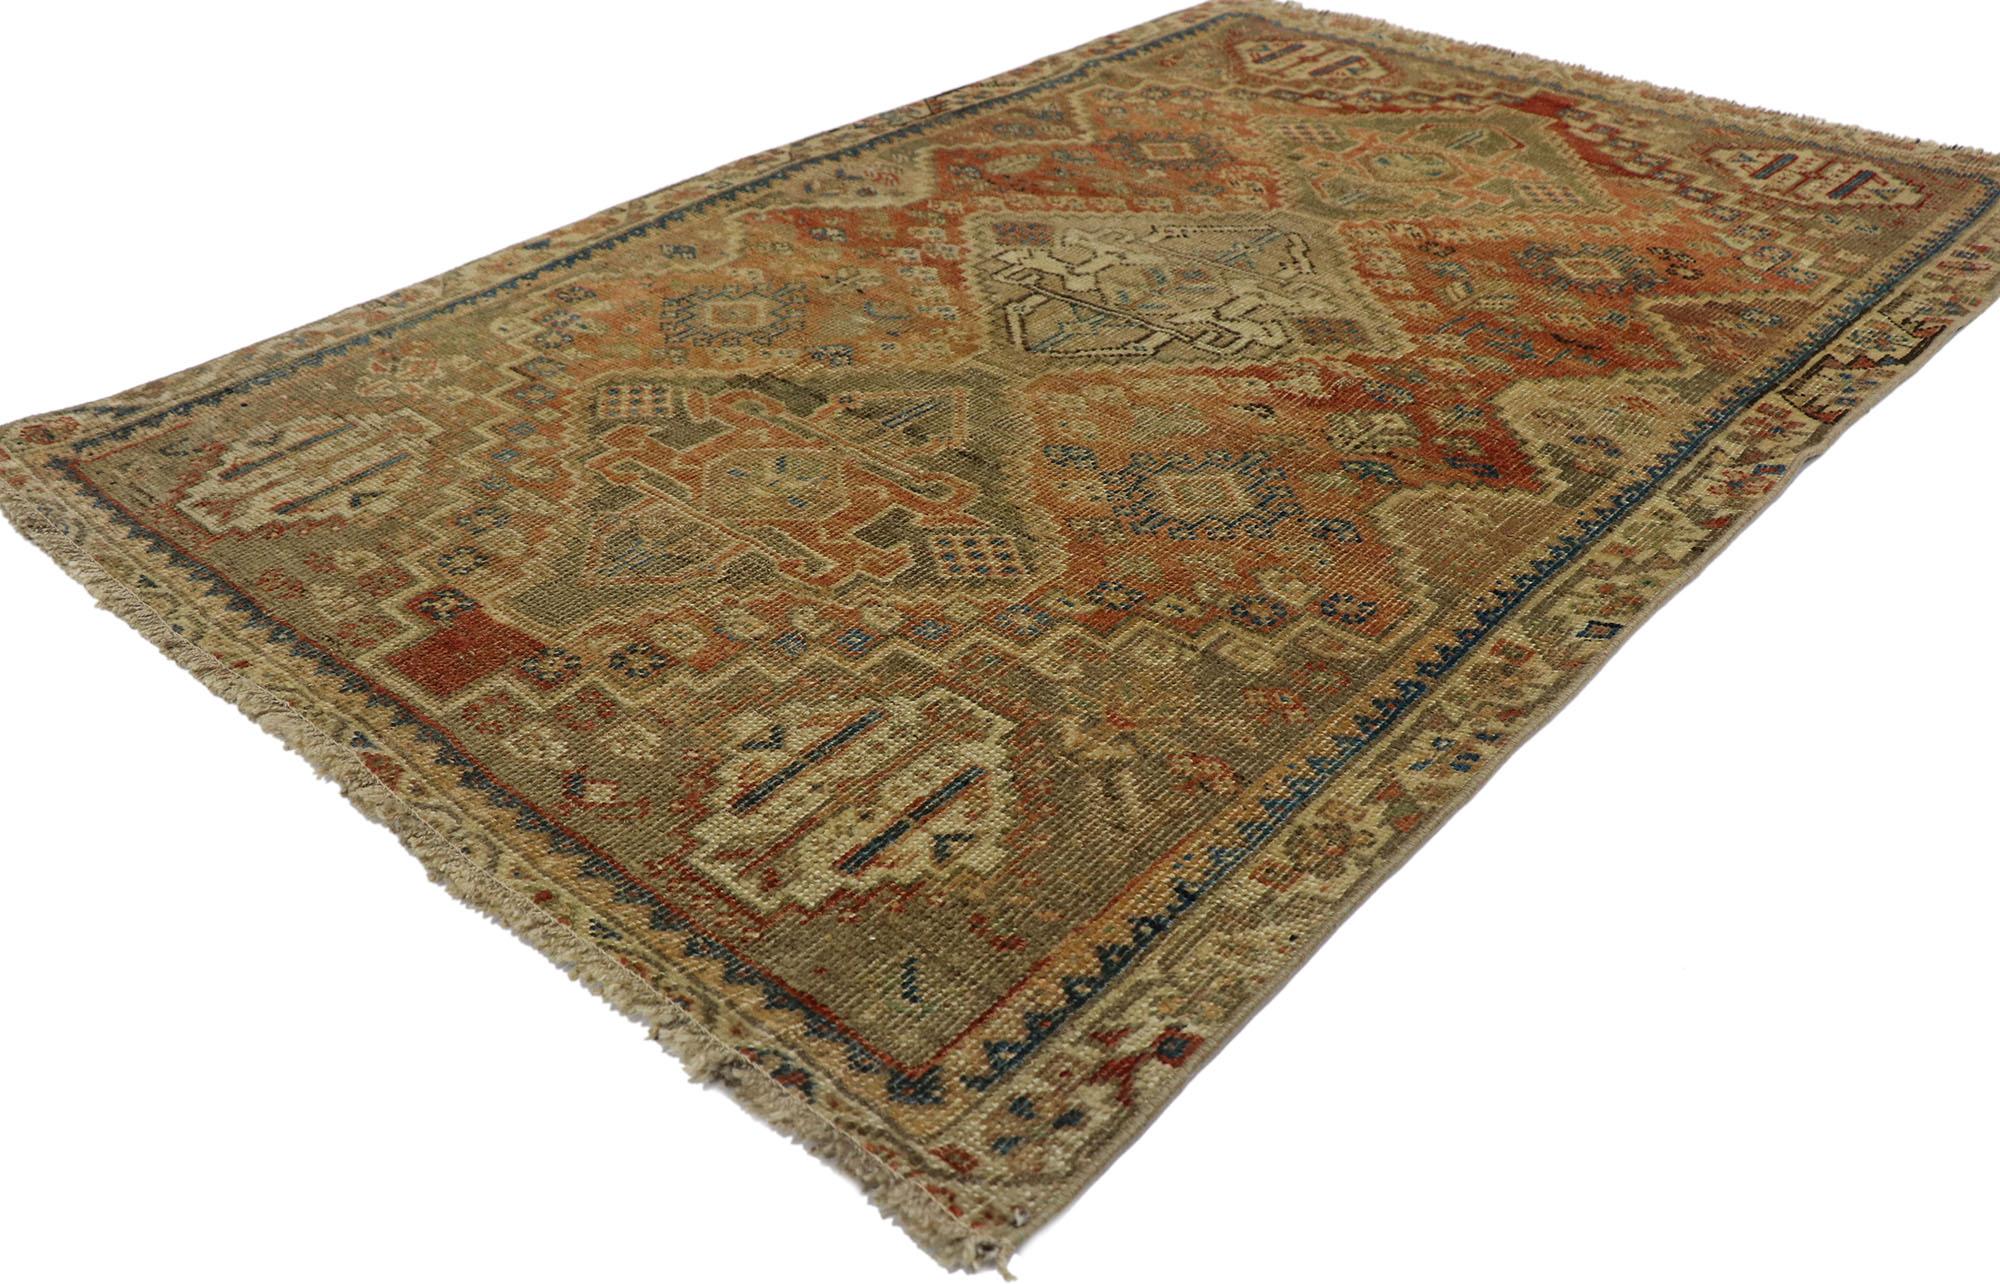 53651 distressed antique Persian Shiraz rug with Rustic Tribal style 03'04 x 05'00. Balancing traditional sensibility and tribal design elements with nostalgic charm, this hand knotted wool distressed antique Persian Shiraz rug can beautifully blend